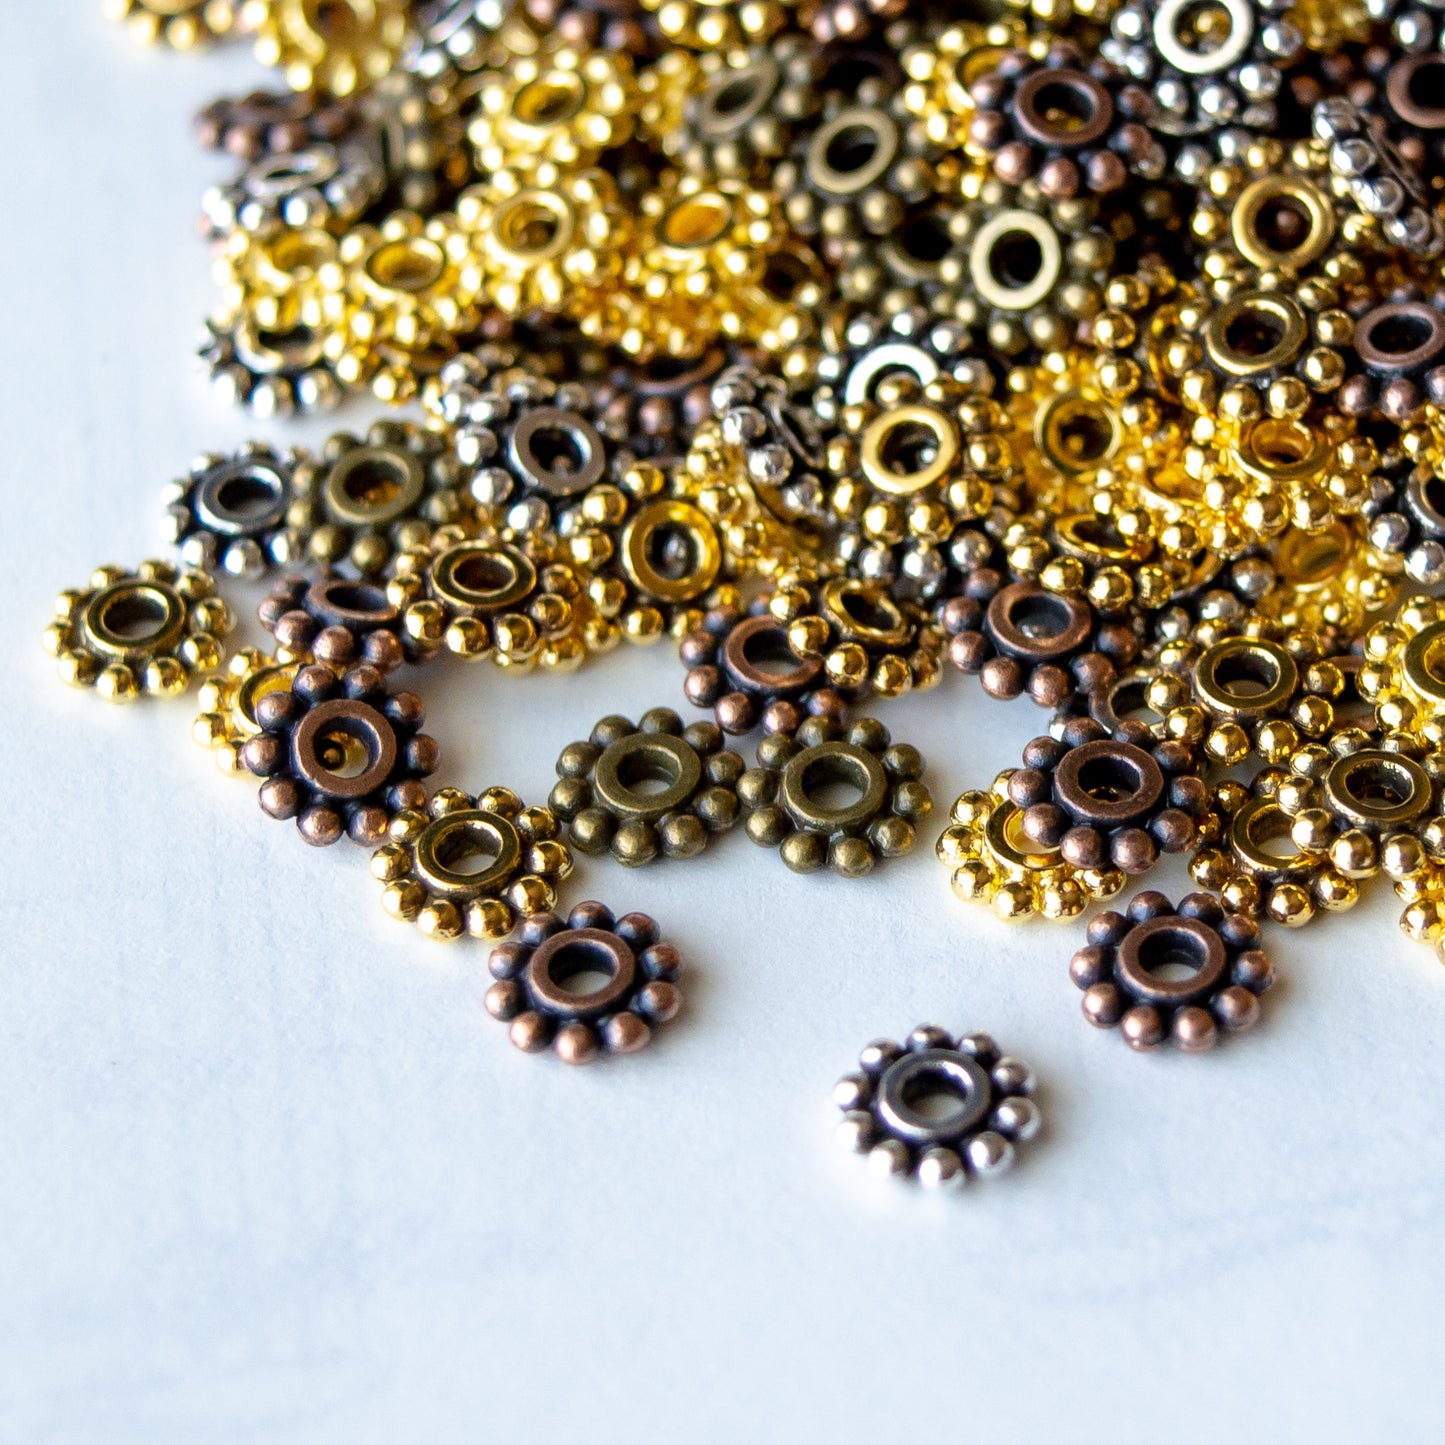 7mm Beaded Rondelle Spacer Beads in Multiple Colors of Metal Alloy